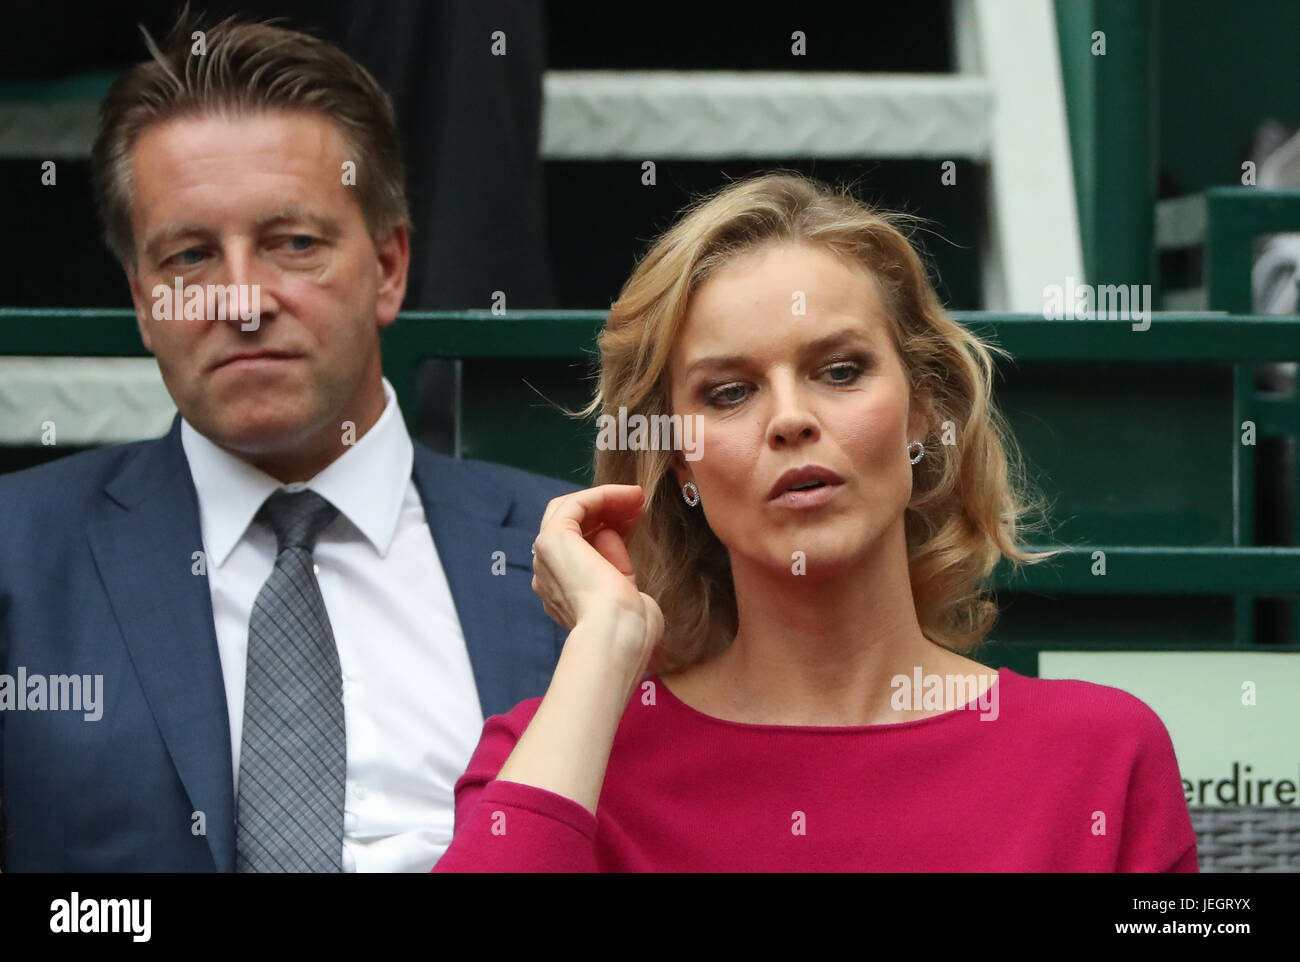 Halle, Germany. 25th June, 2017. Model Eva Herzigova sits in front of the tournament director Ralf Weber during the ATP tennis tournament men's singles final match between A. Zverev of Germany against R. Federer of Switzerland in Halle, Germany, 25 June 2017. Photo: Friso Gentsch/dpa/Alamy Live News Stock Photo